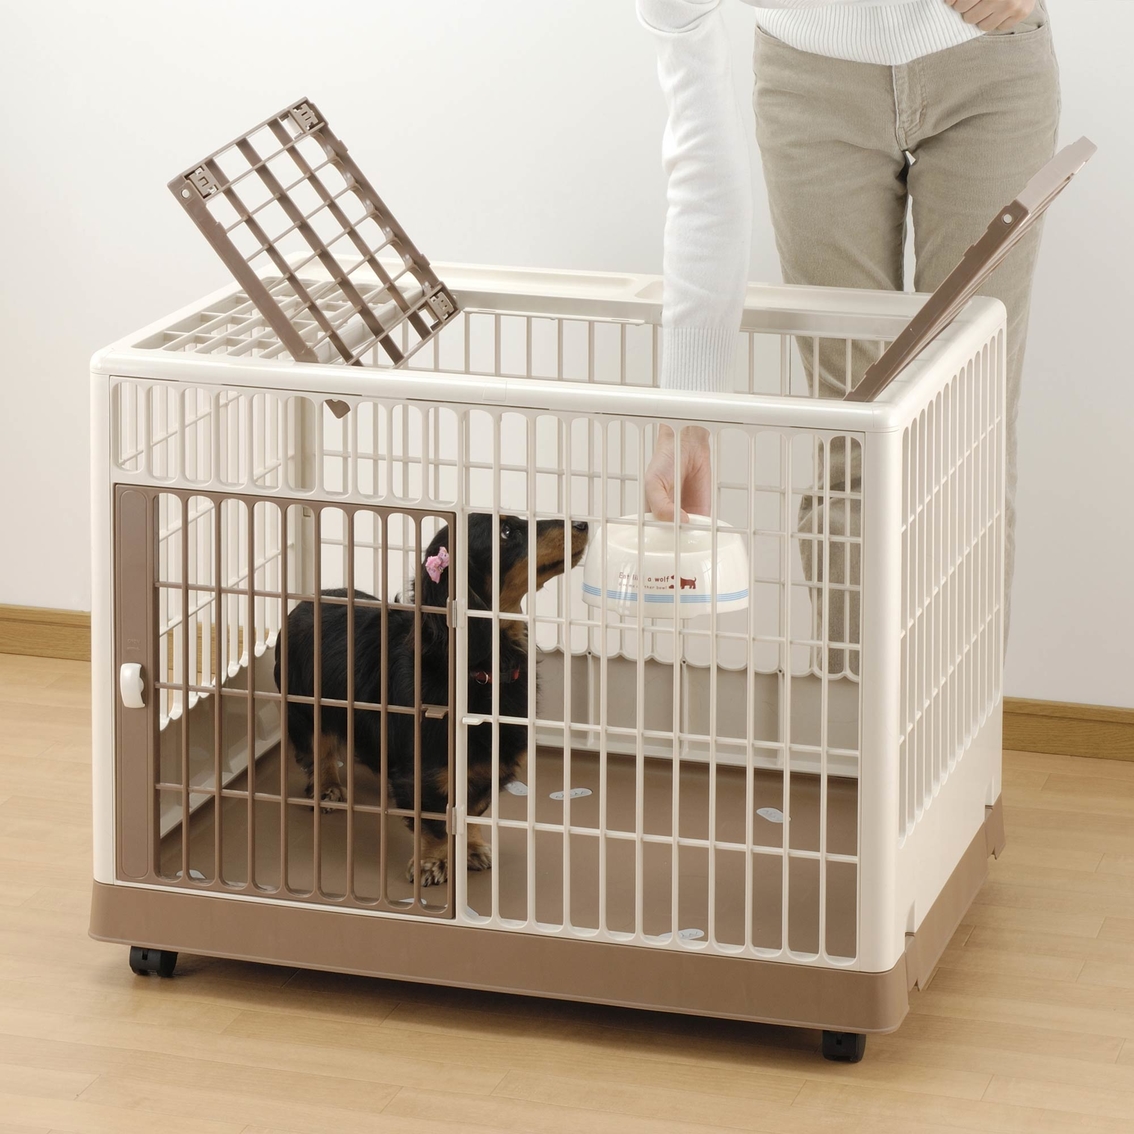 Richell Pet Training Kennel - Image 5 of 5